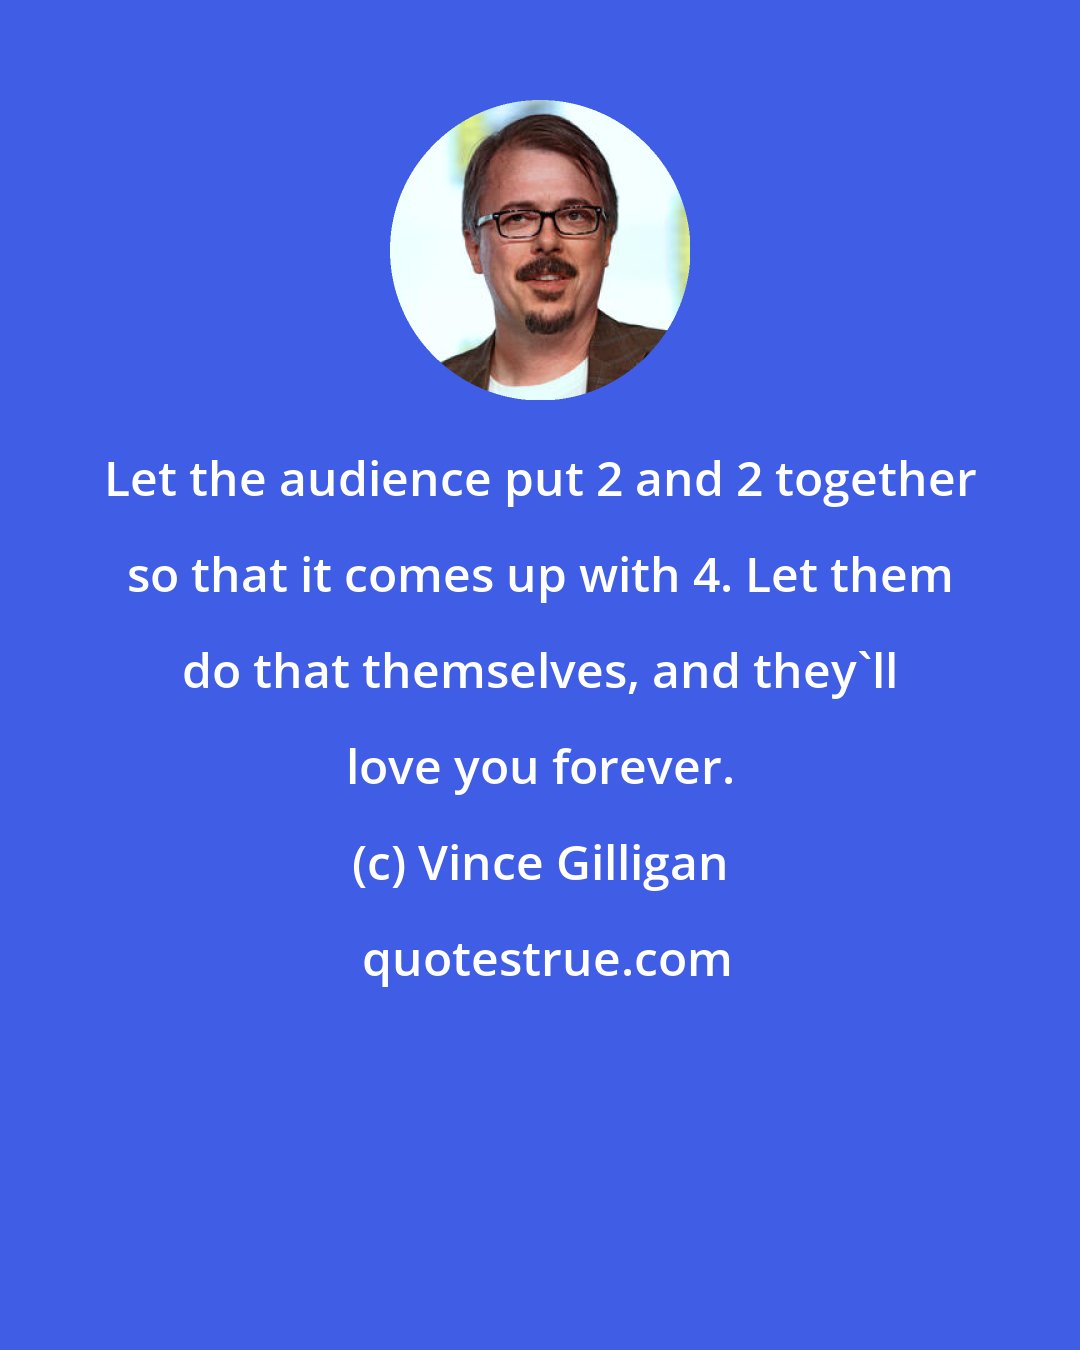 Vince Gilligan: Let the audience put 2 and 2 together so that it comes up with 4. Let them do that themselves, and they'll love you forever.